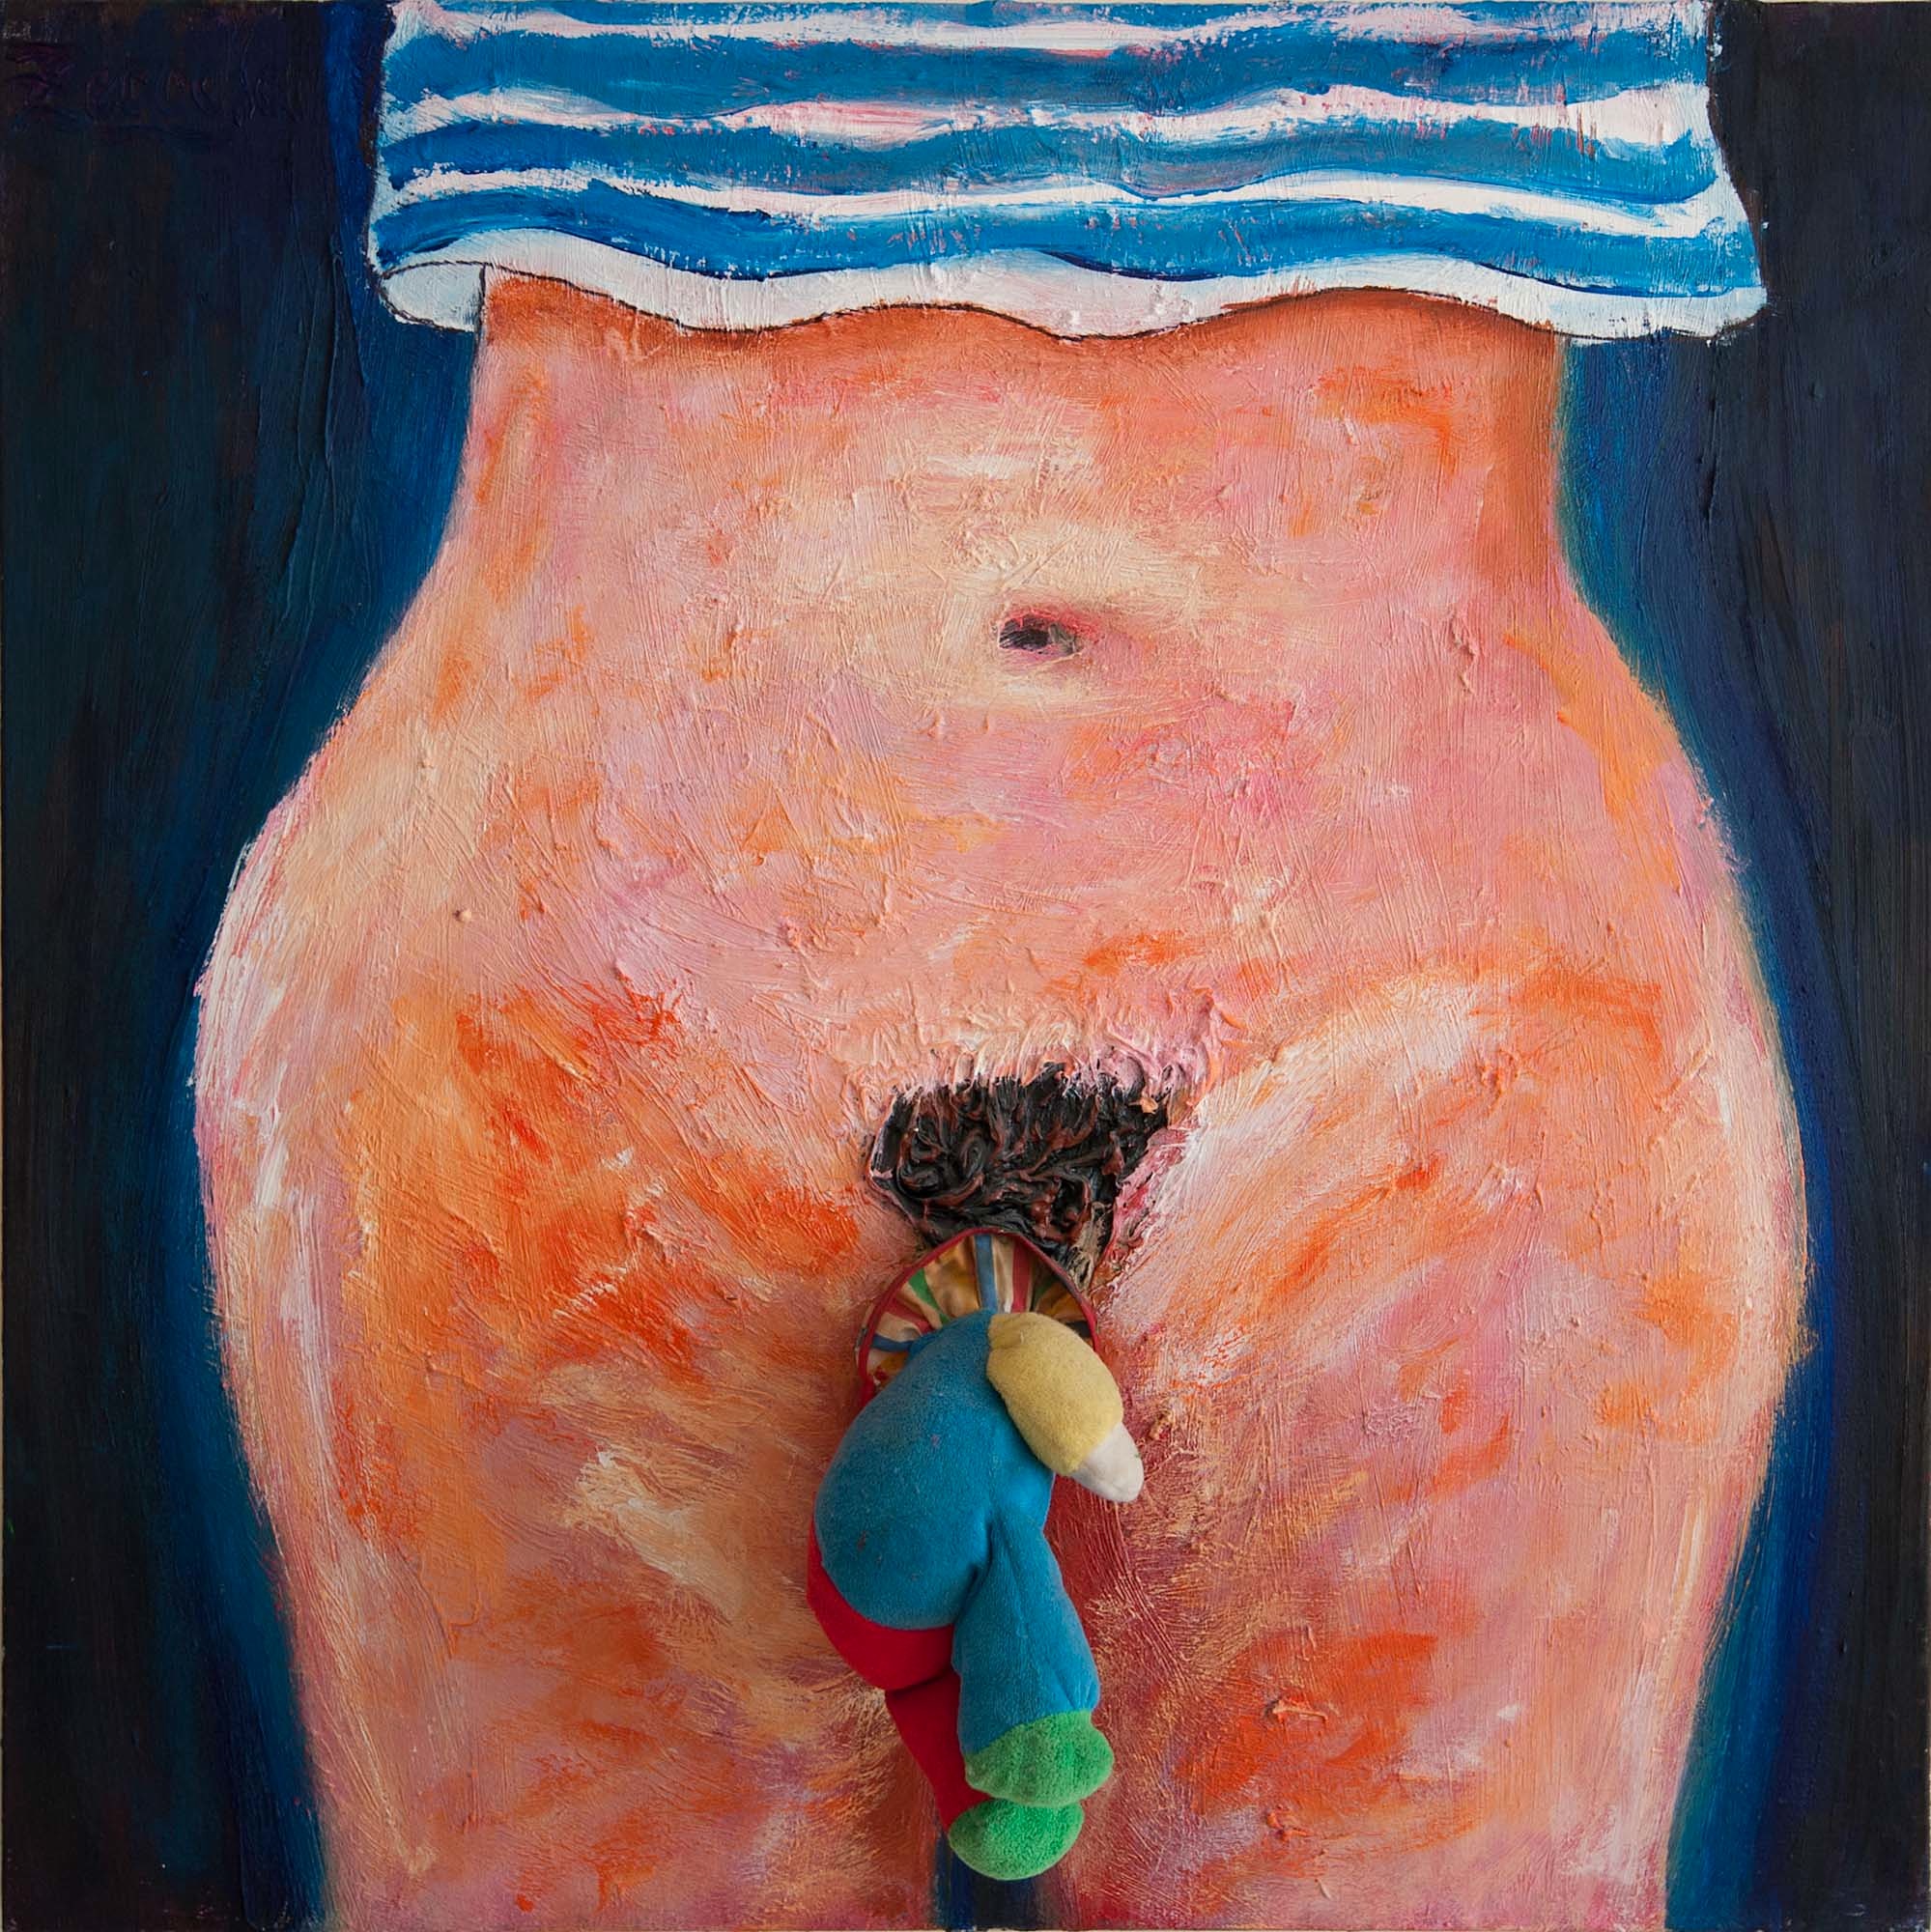 Heads or Tails, 2013. Oil, acrylic, doll on canvas. 30" x 30".